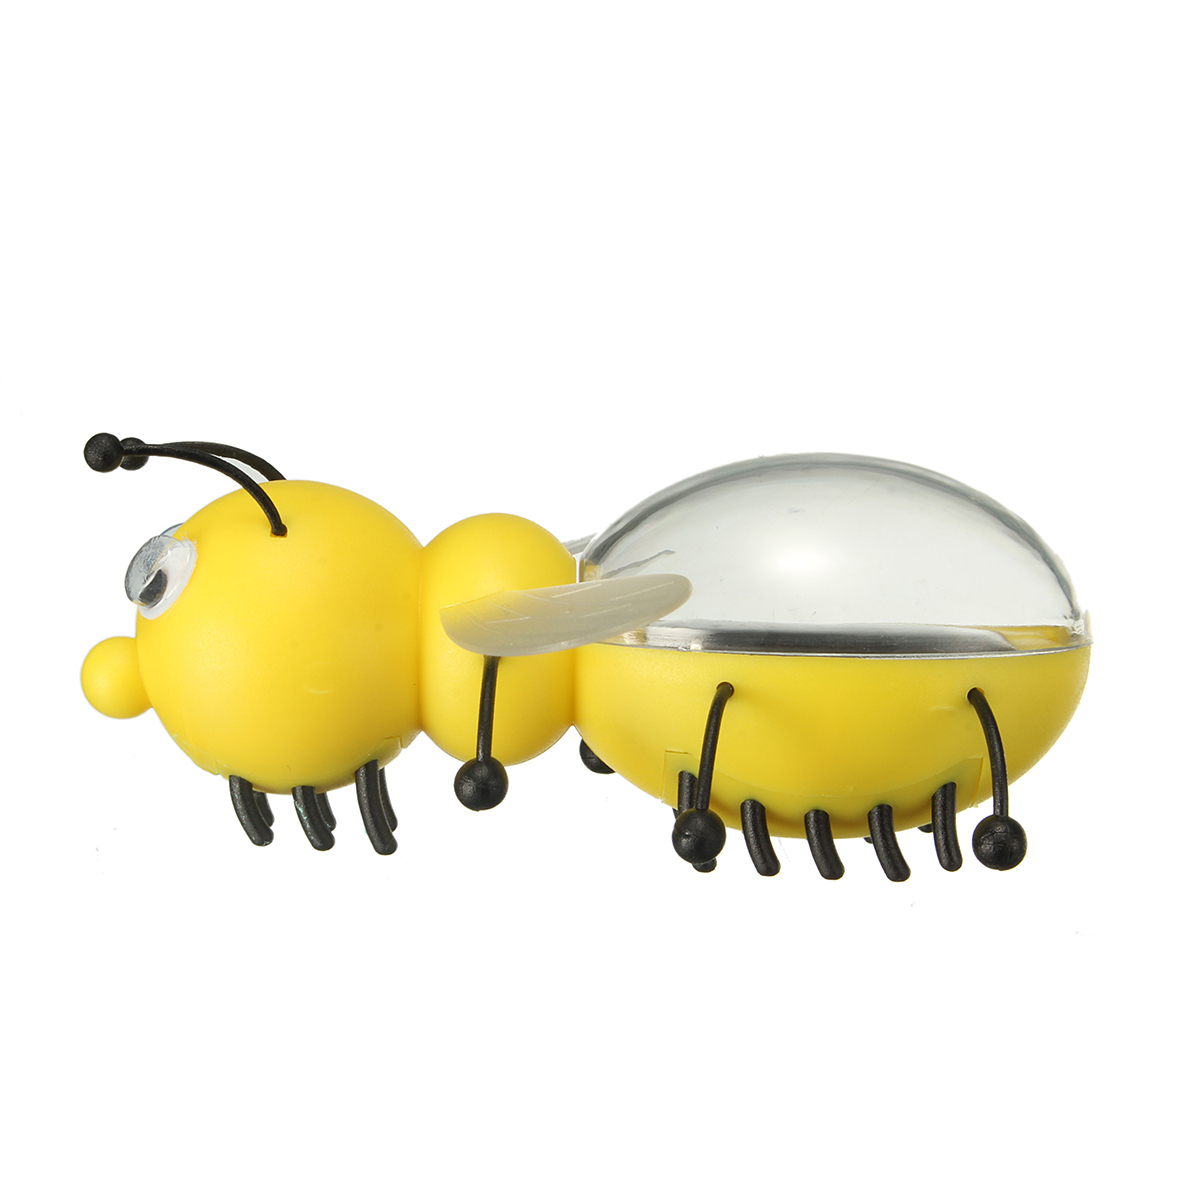 Educational-Solar-Powered-Bee-Ant-Robot-Toy-Gadget-Gift-1965213-4